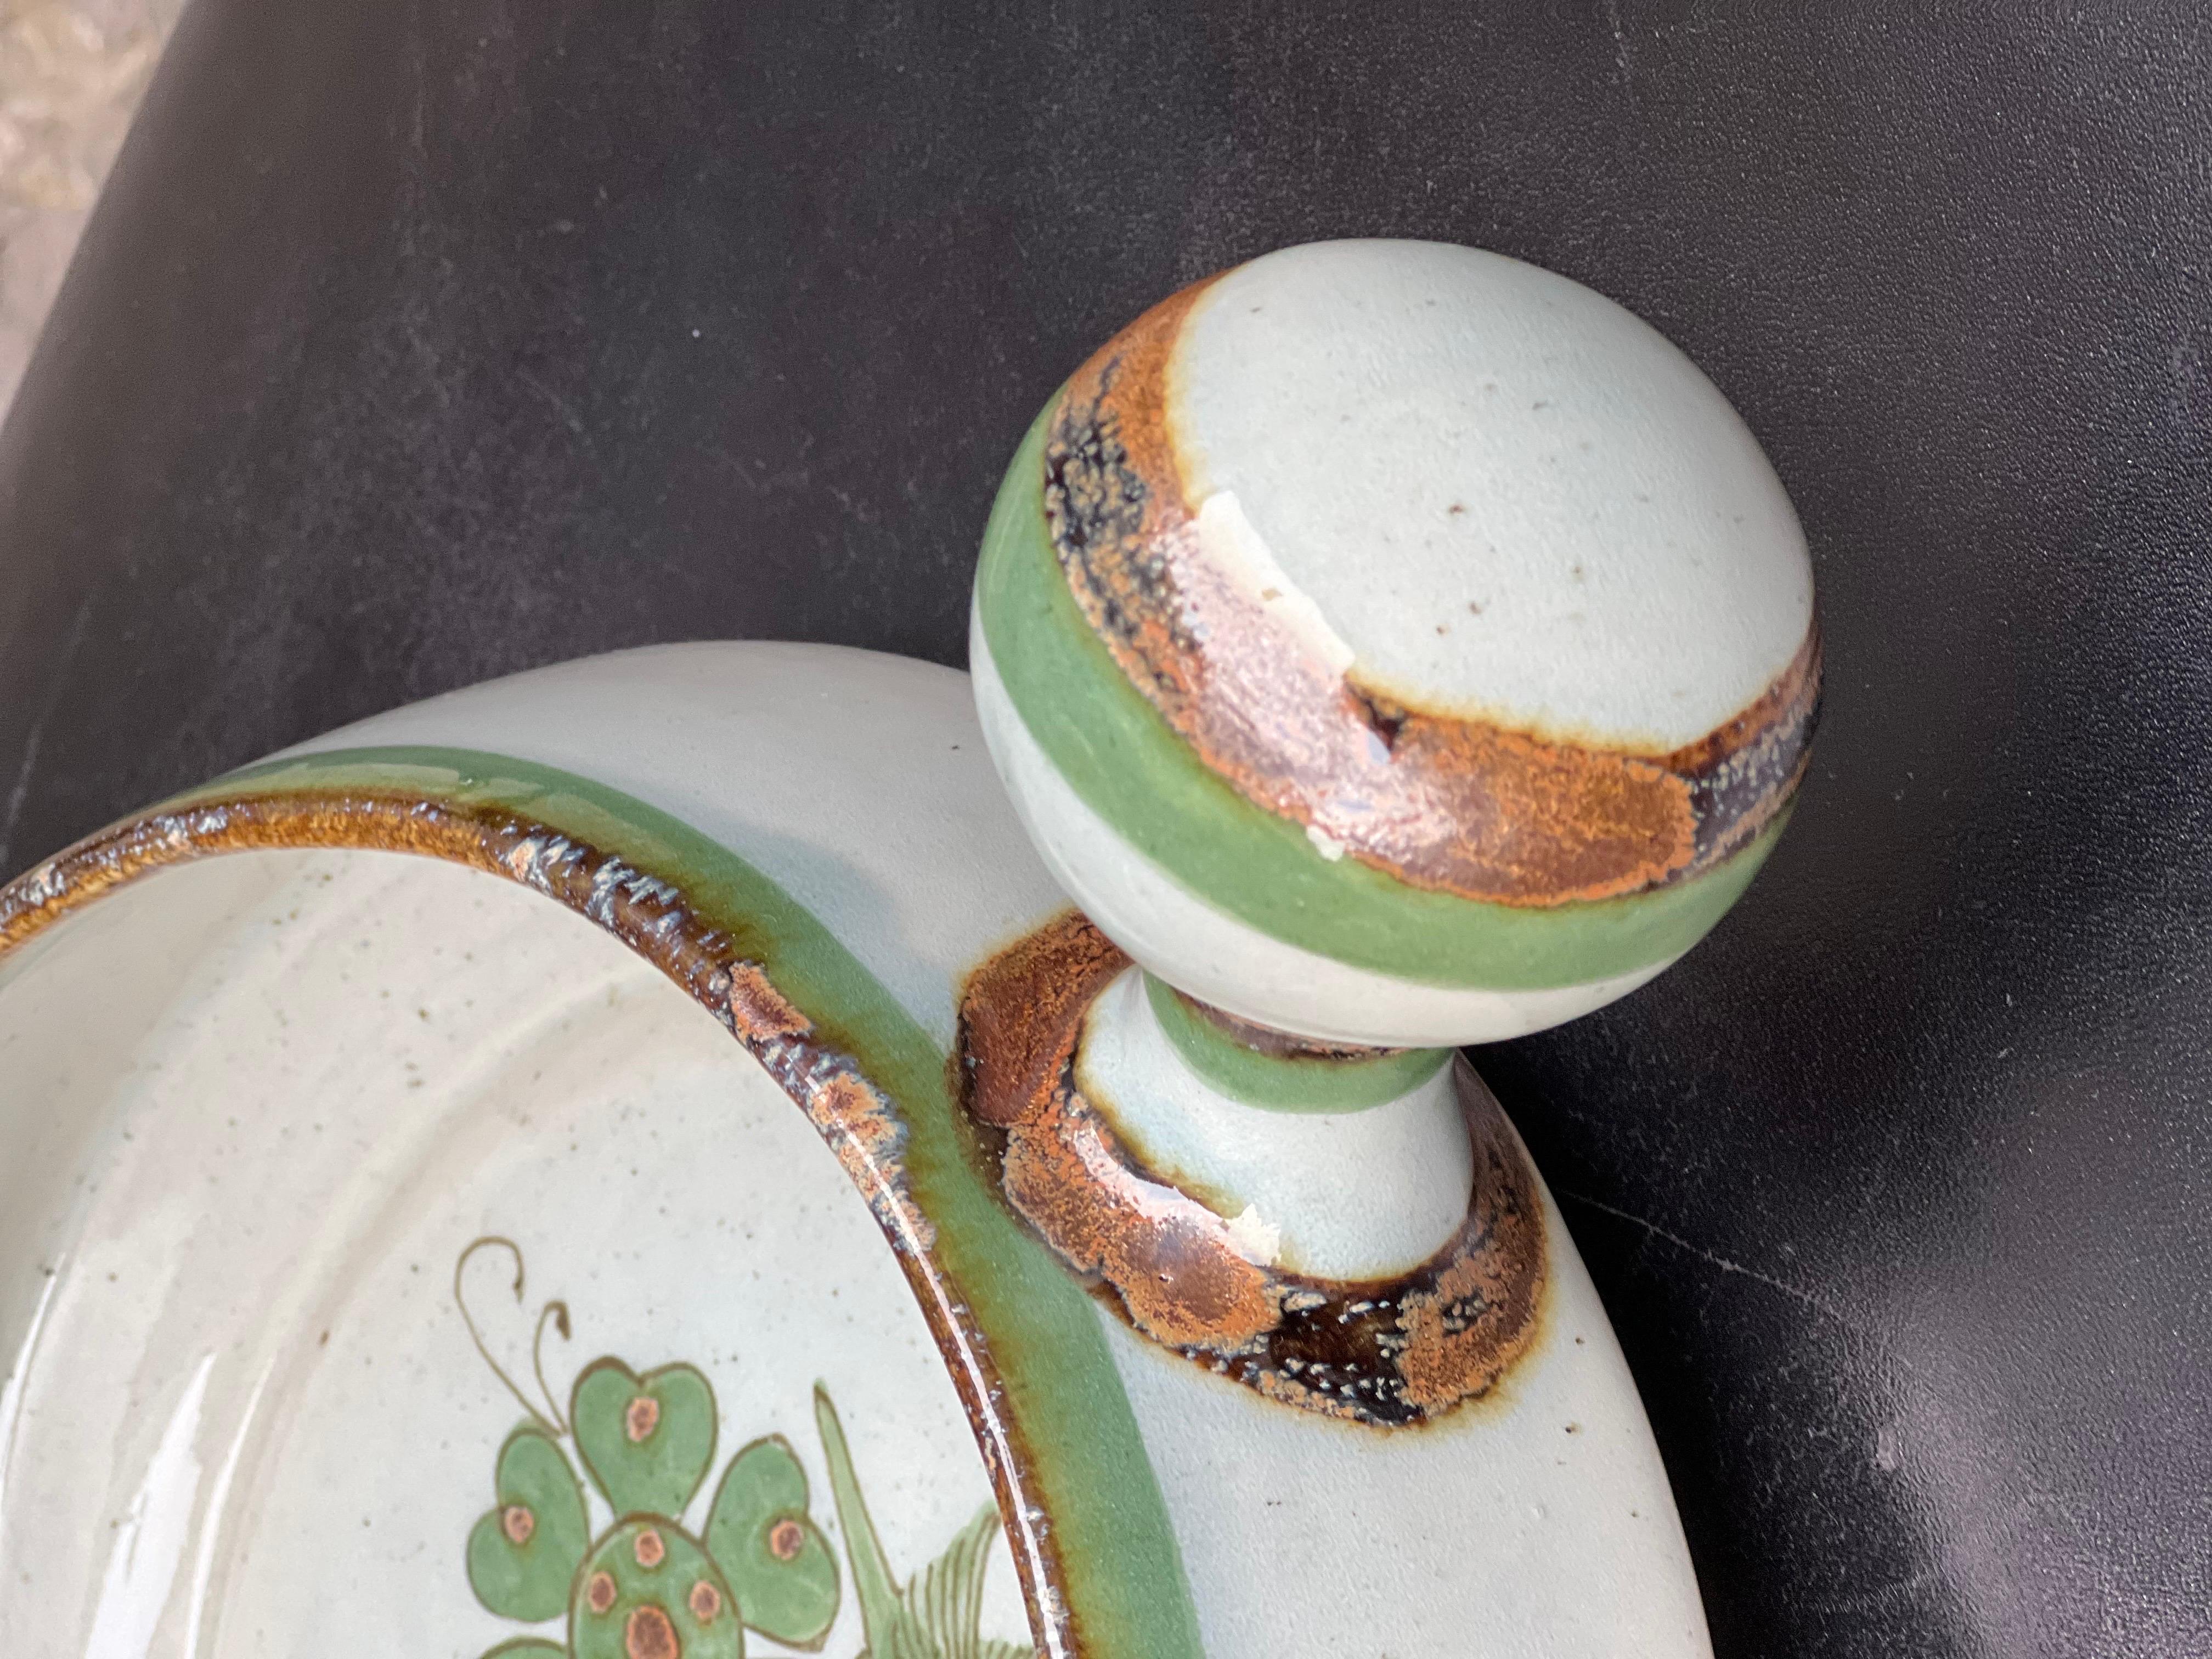 Vintage Ken Edwards Mexican ceramic deep serving dish from El Palomac. Beautiful vintage Mexican hand made and hand painted Ken Edwards Art Pottery. Decorative and usable tableware. Tastefully decorated and beautifully made. Signed and with